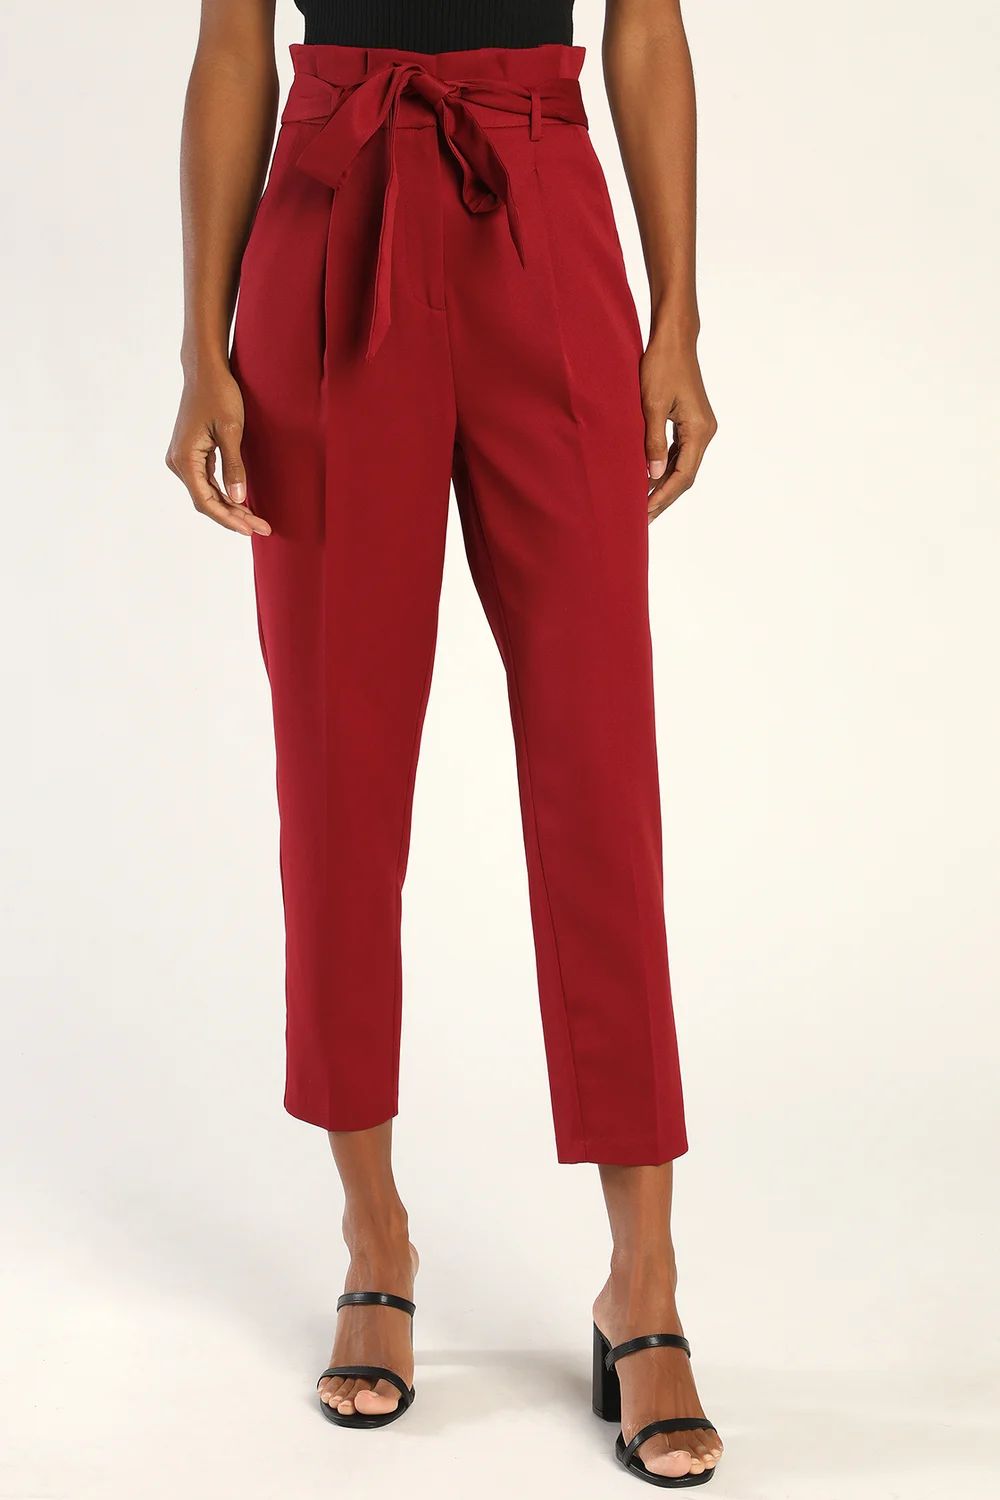 With Confidence Wine Red Paper Bag Waist Pants | Lulus (US)